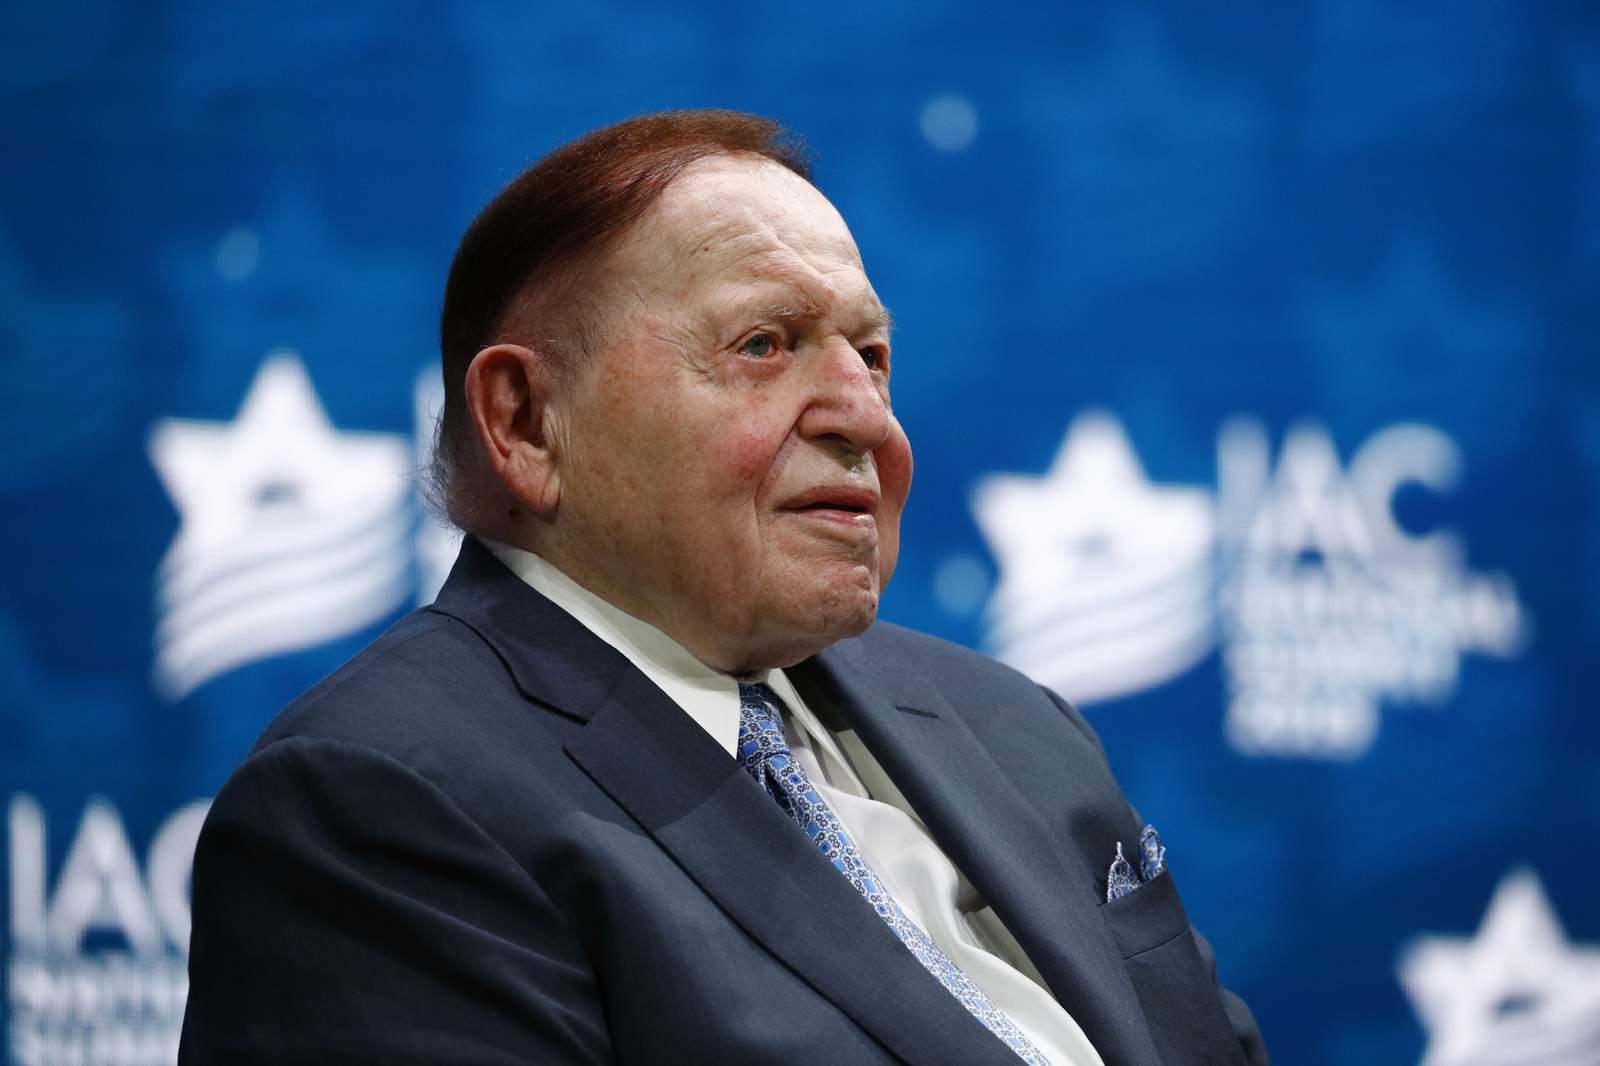 Congress questions sale of US residence in Israel to Adelson